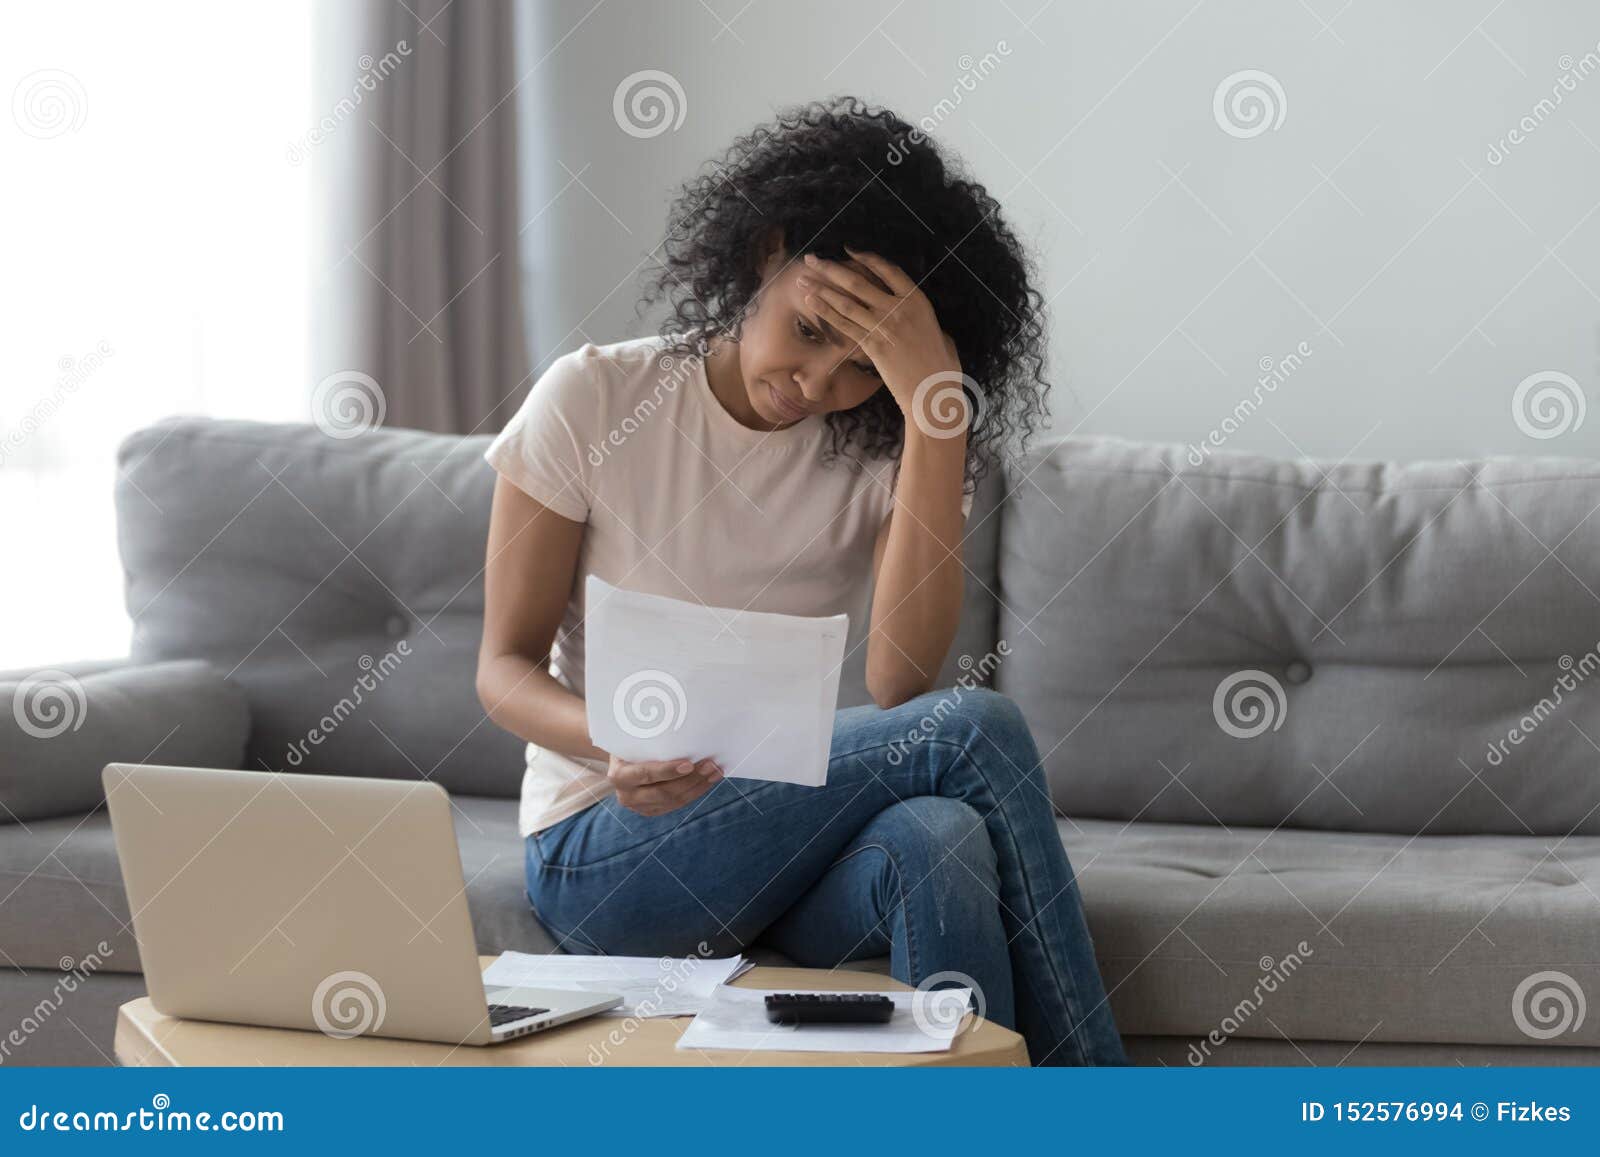 stressed african woman holding bills worried about bankruptcy bank debt